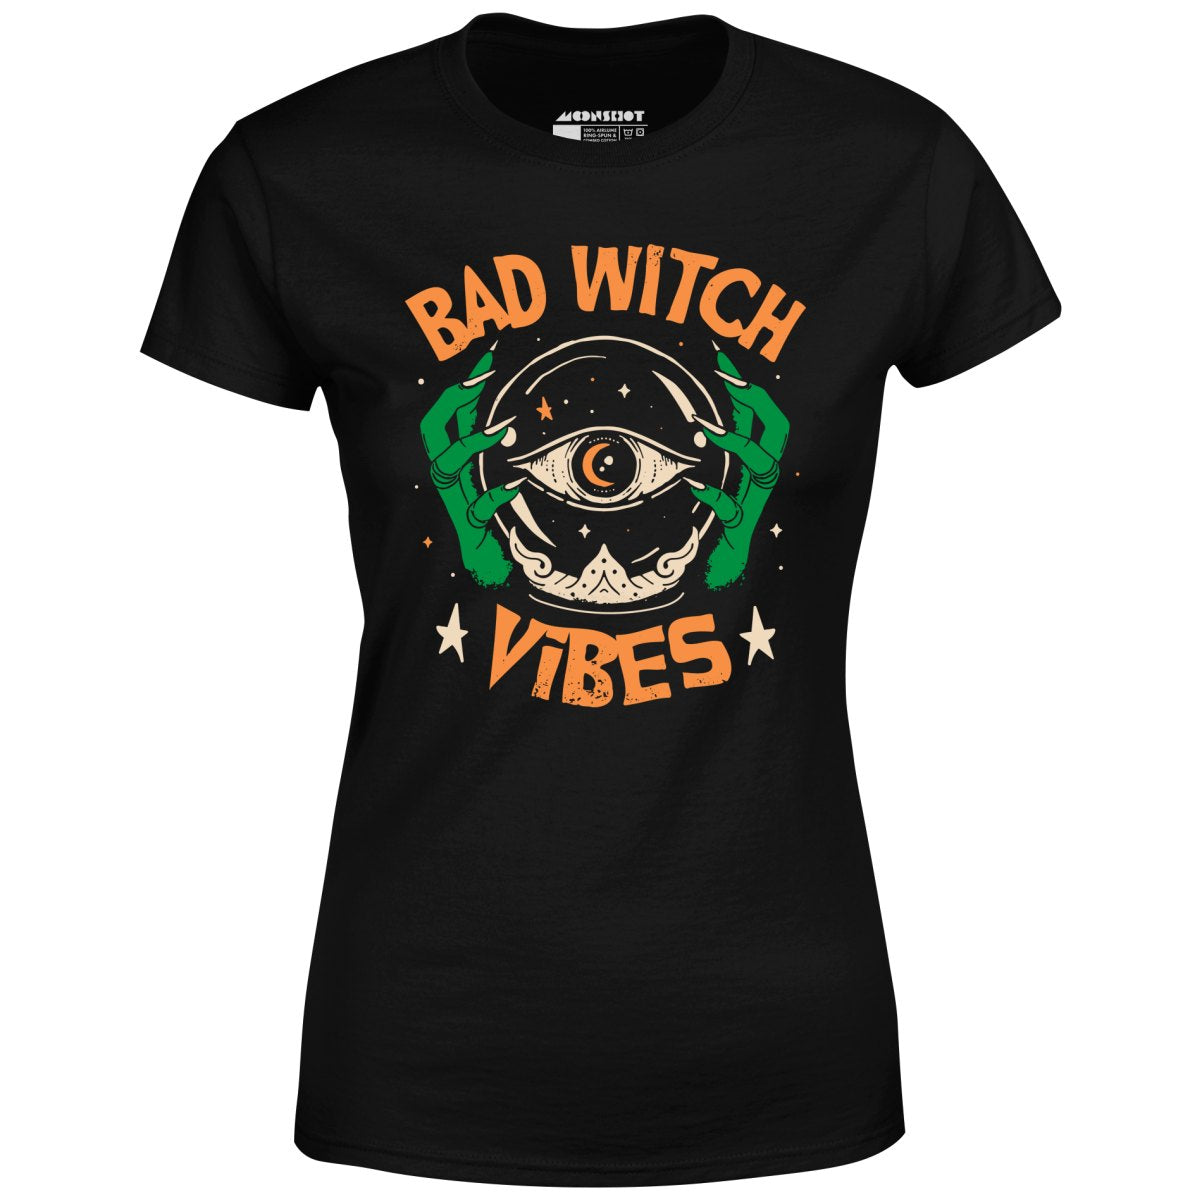 Bad Witch Vibes - Women's T-Shirt